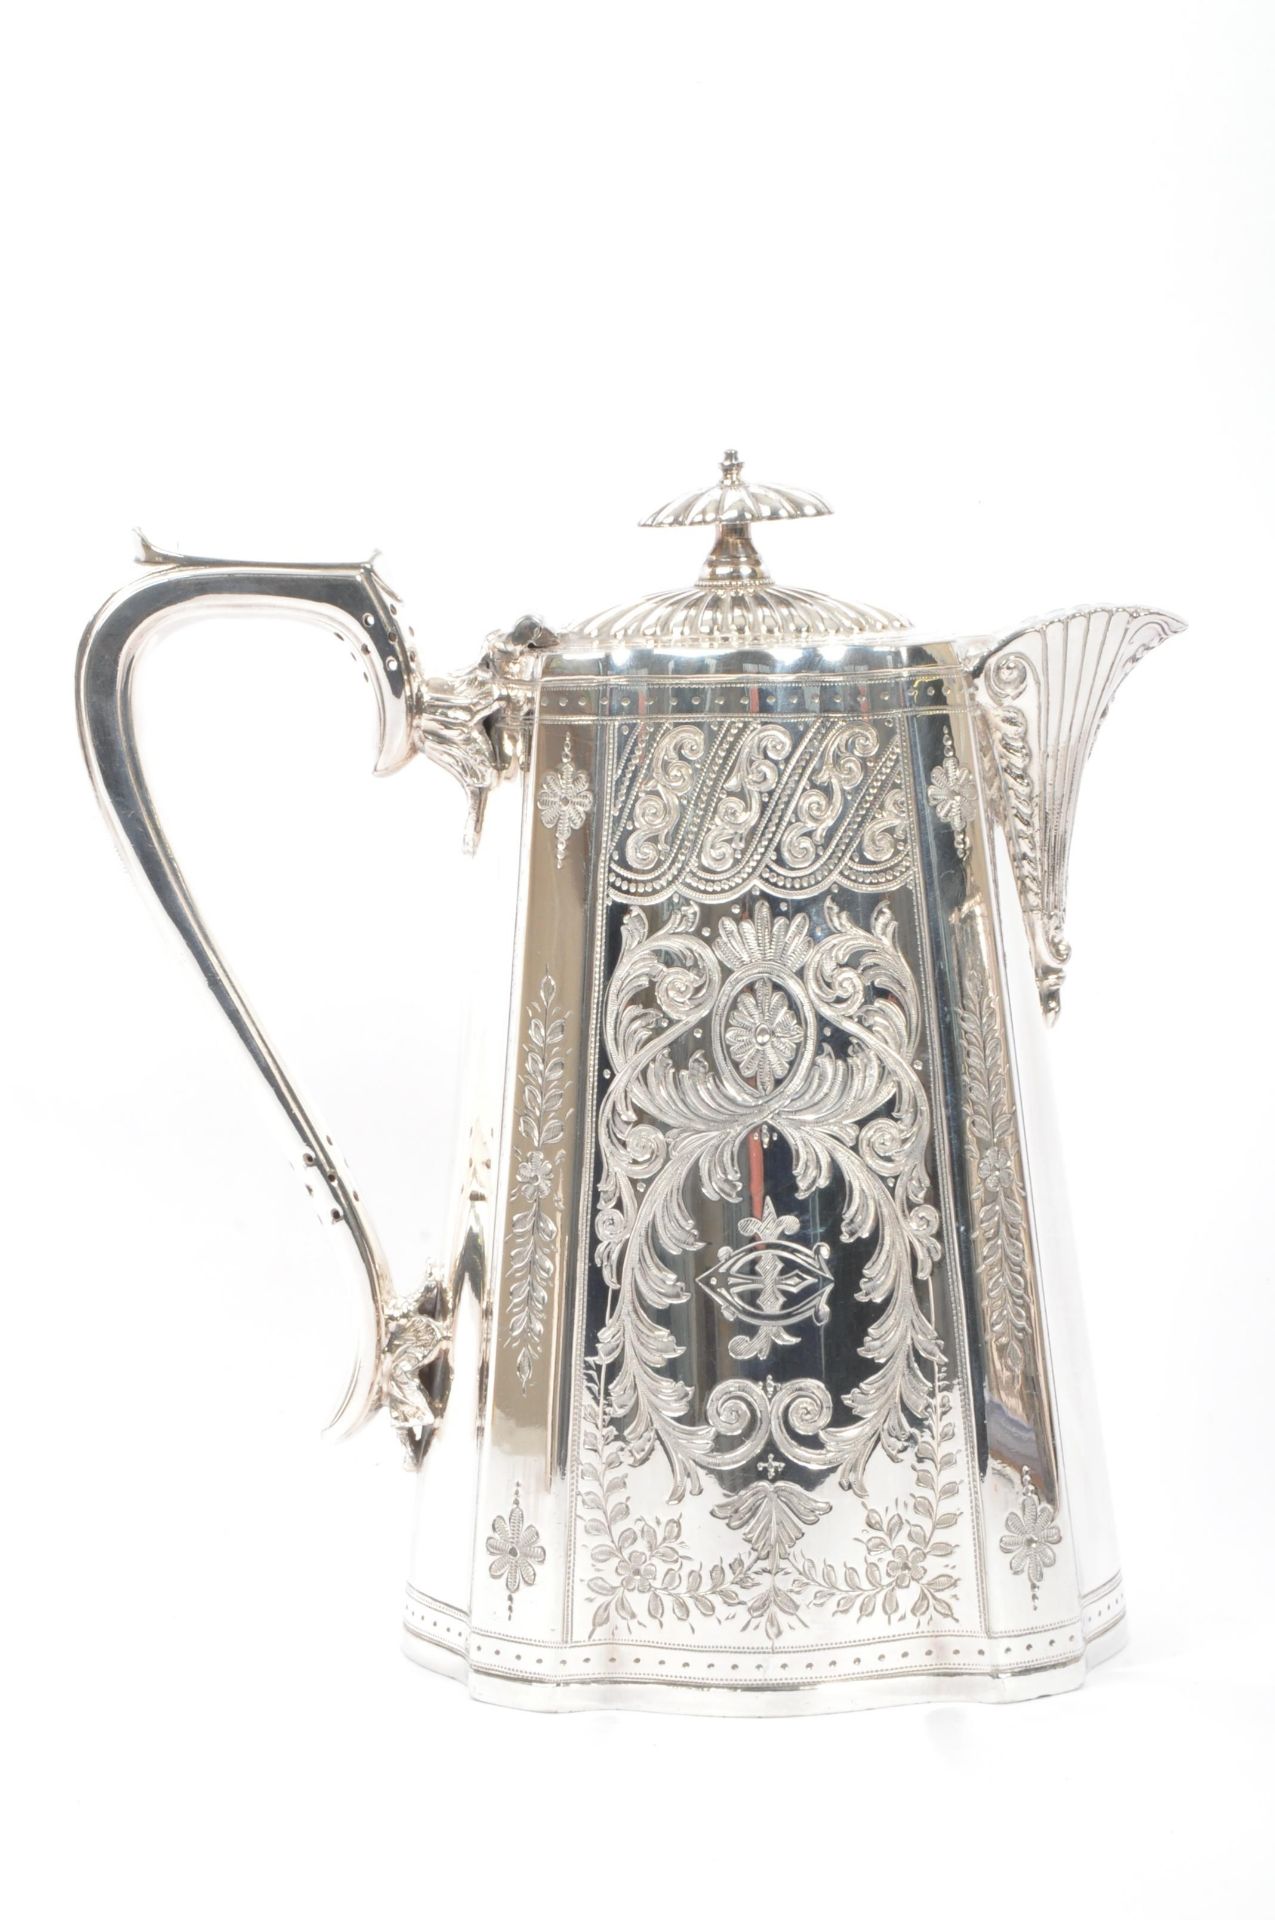 EARLY 20TH CENTURY WALKER & HALL, SHEFFIELD SILVER PLATED ITEMS - Image 3 of 7